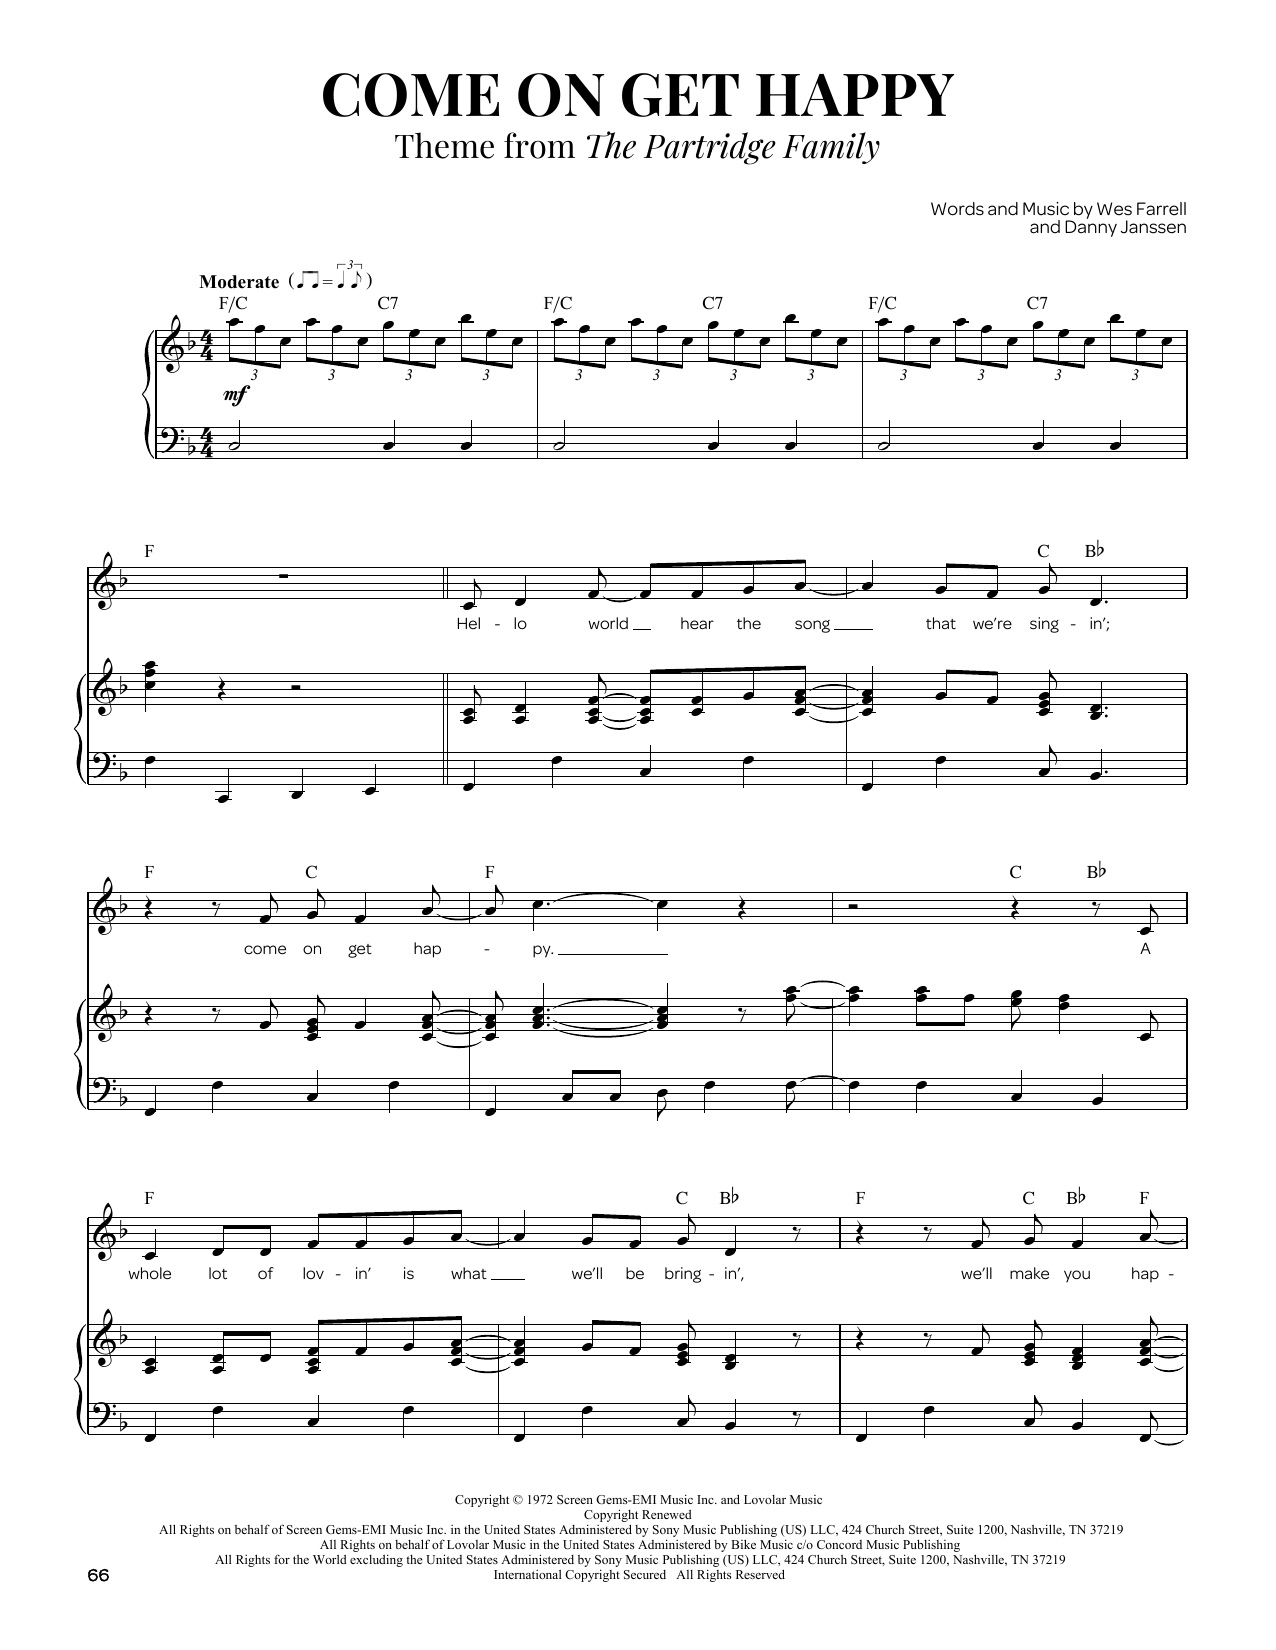 Download The Partridge Family Come On Get Happy Sheet Music